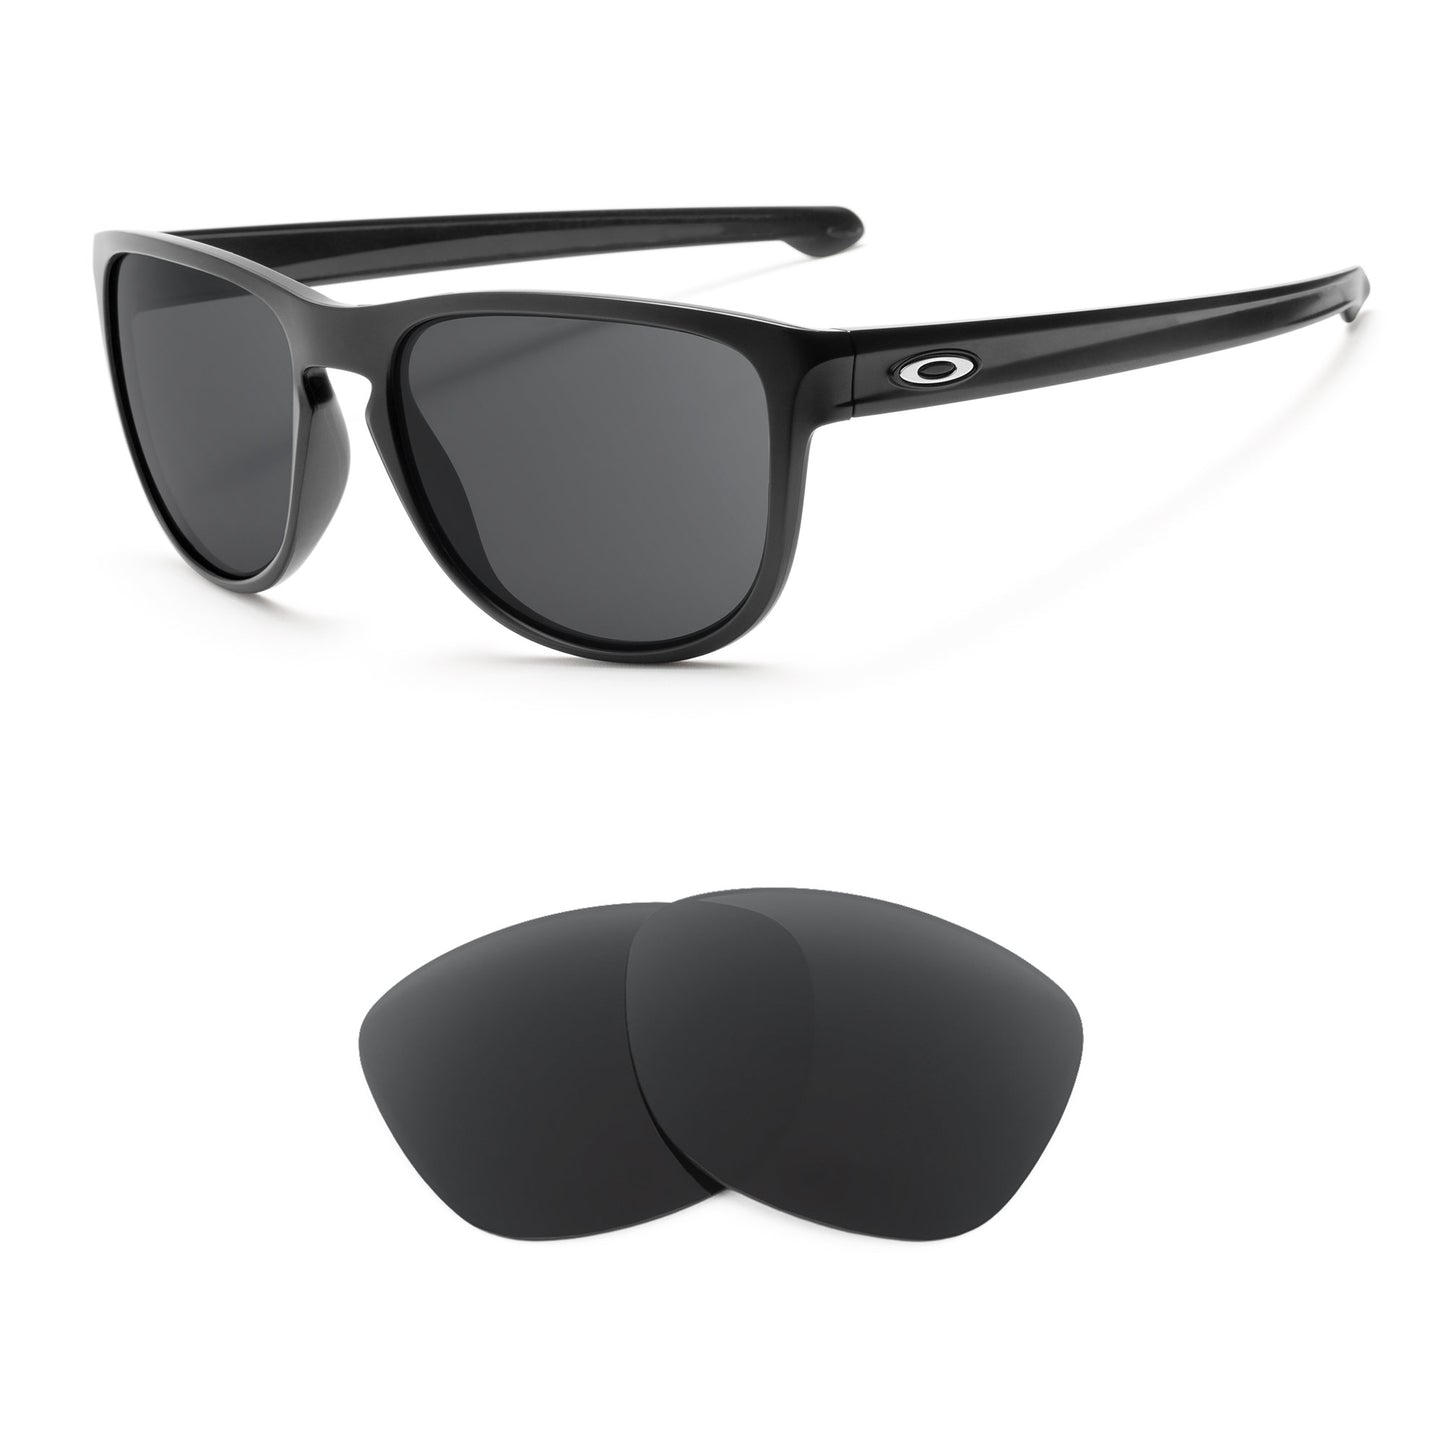 Oakley Stringer sunglasses with replacement lenses